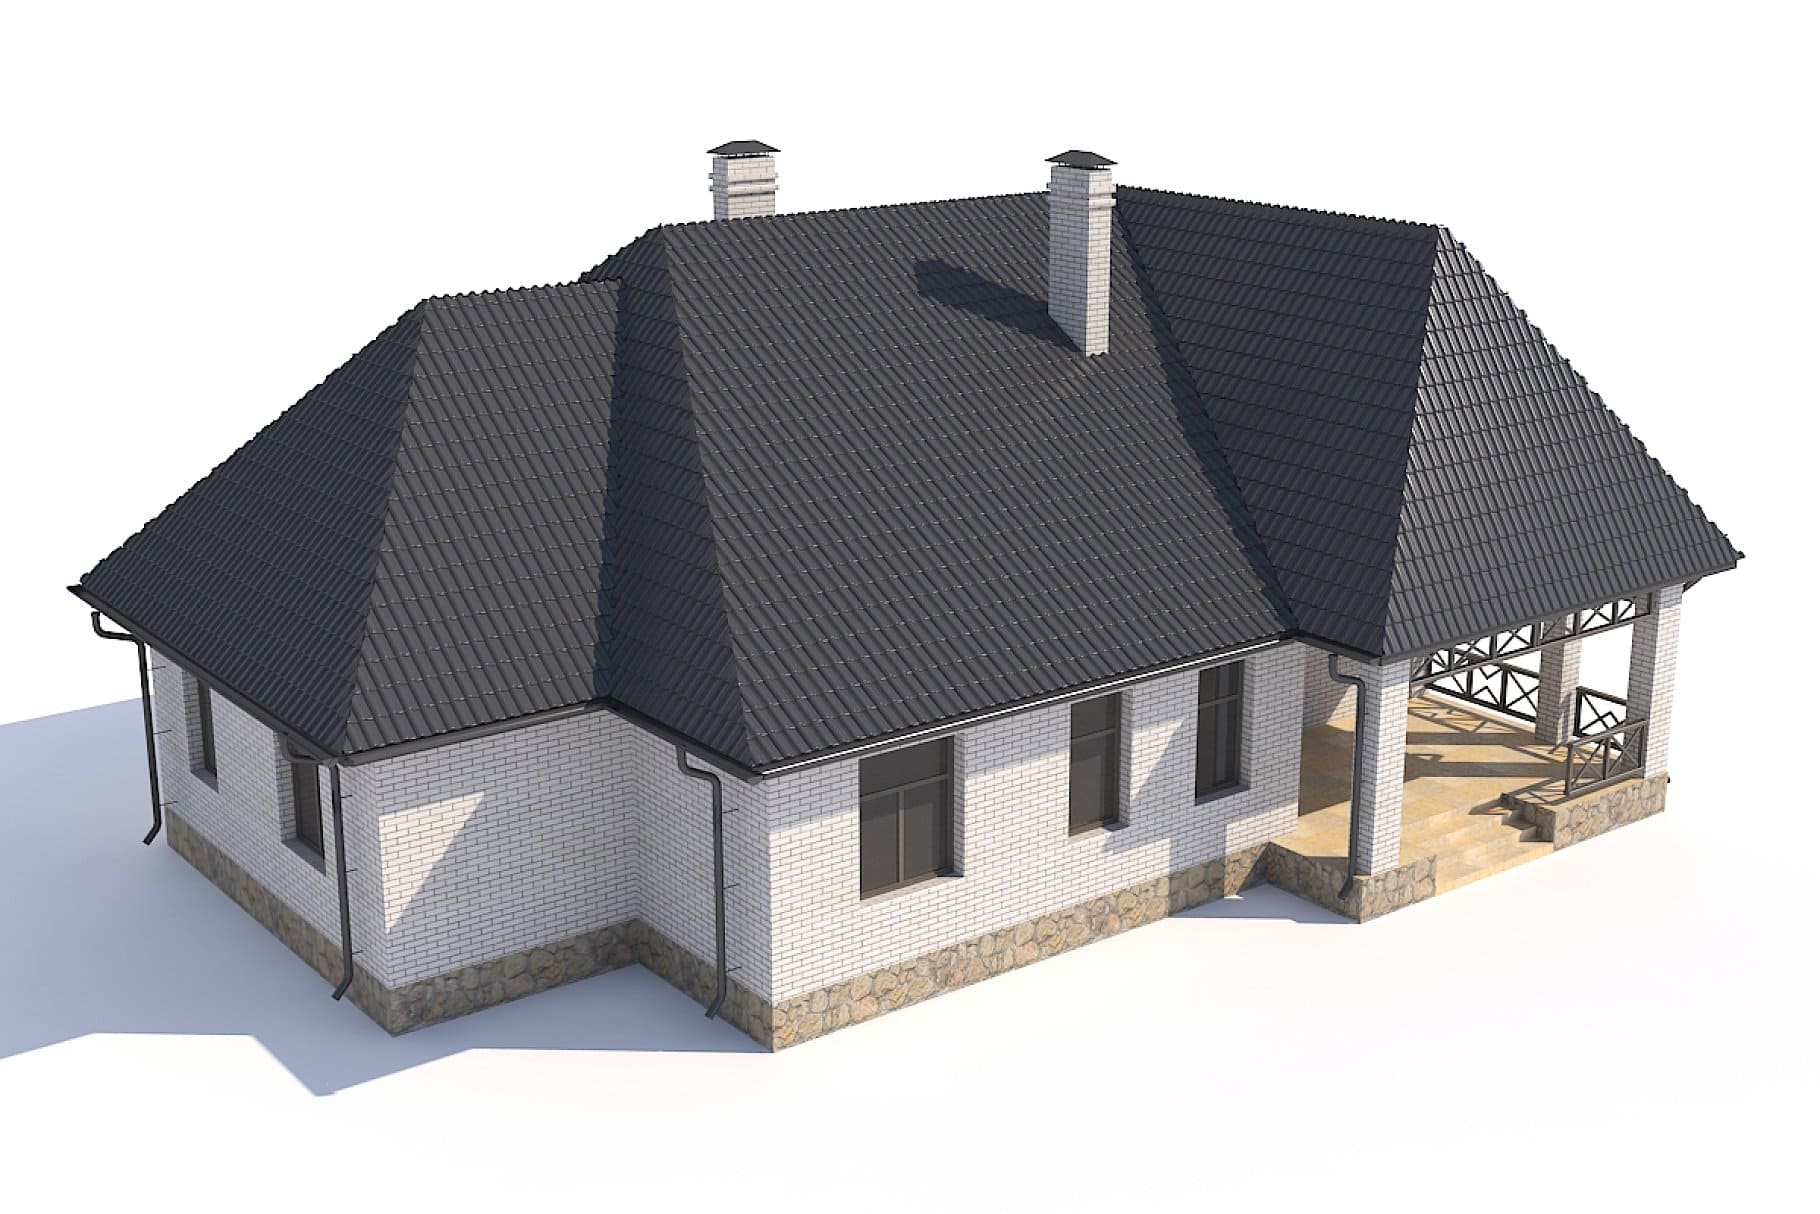 3D model of a one-story house made of silicate brick.